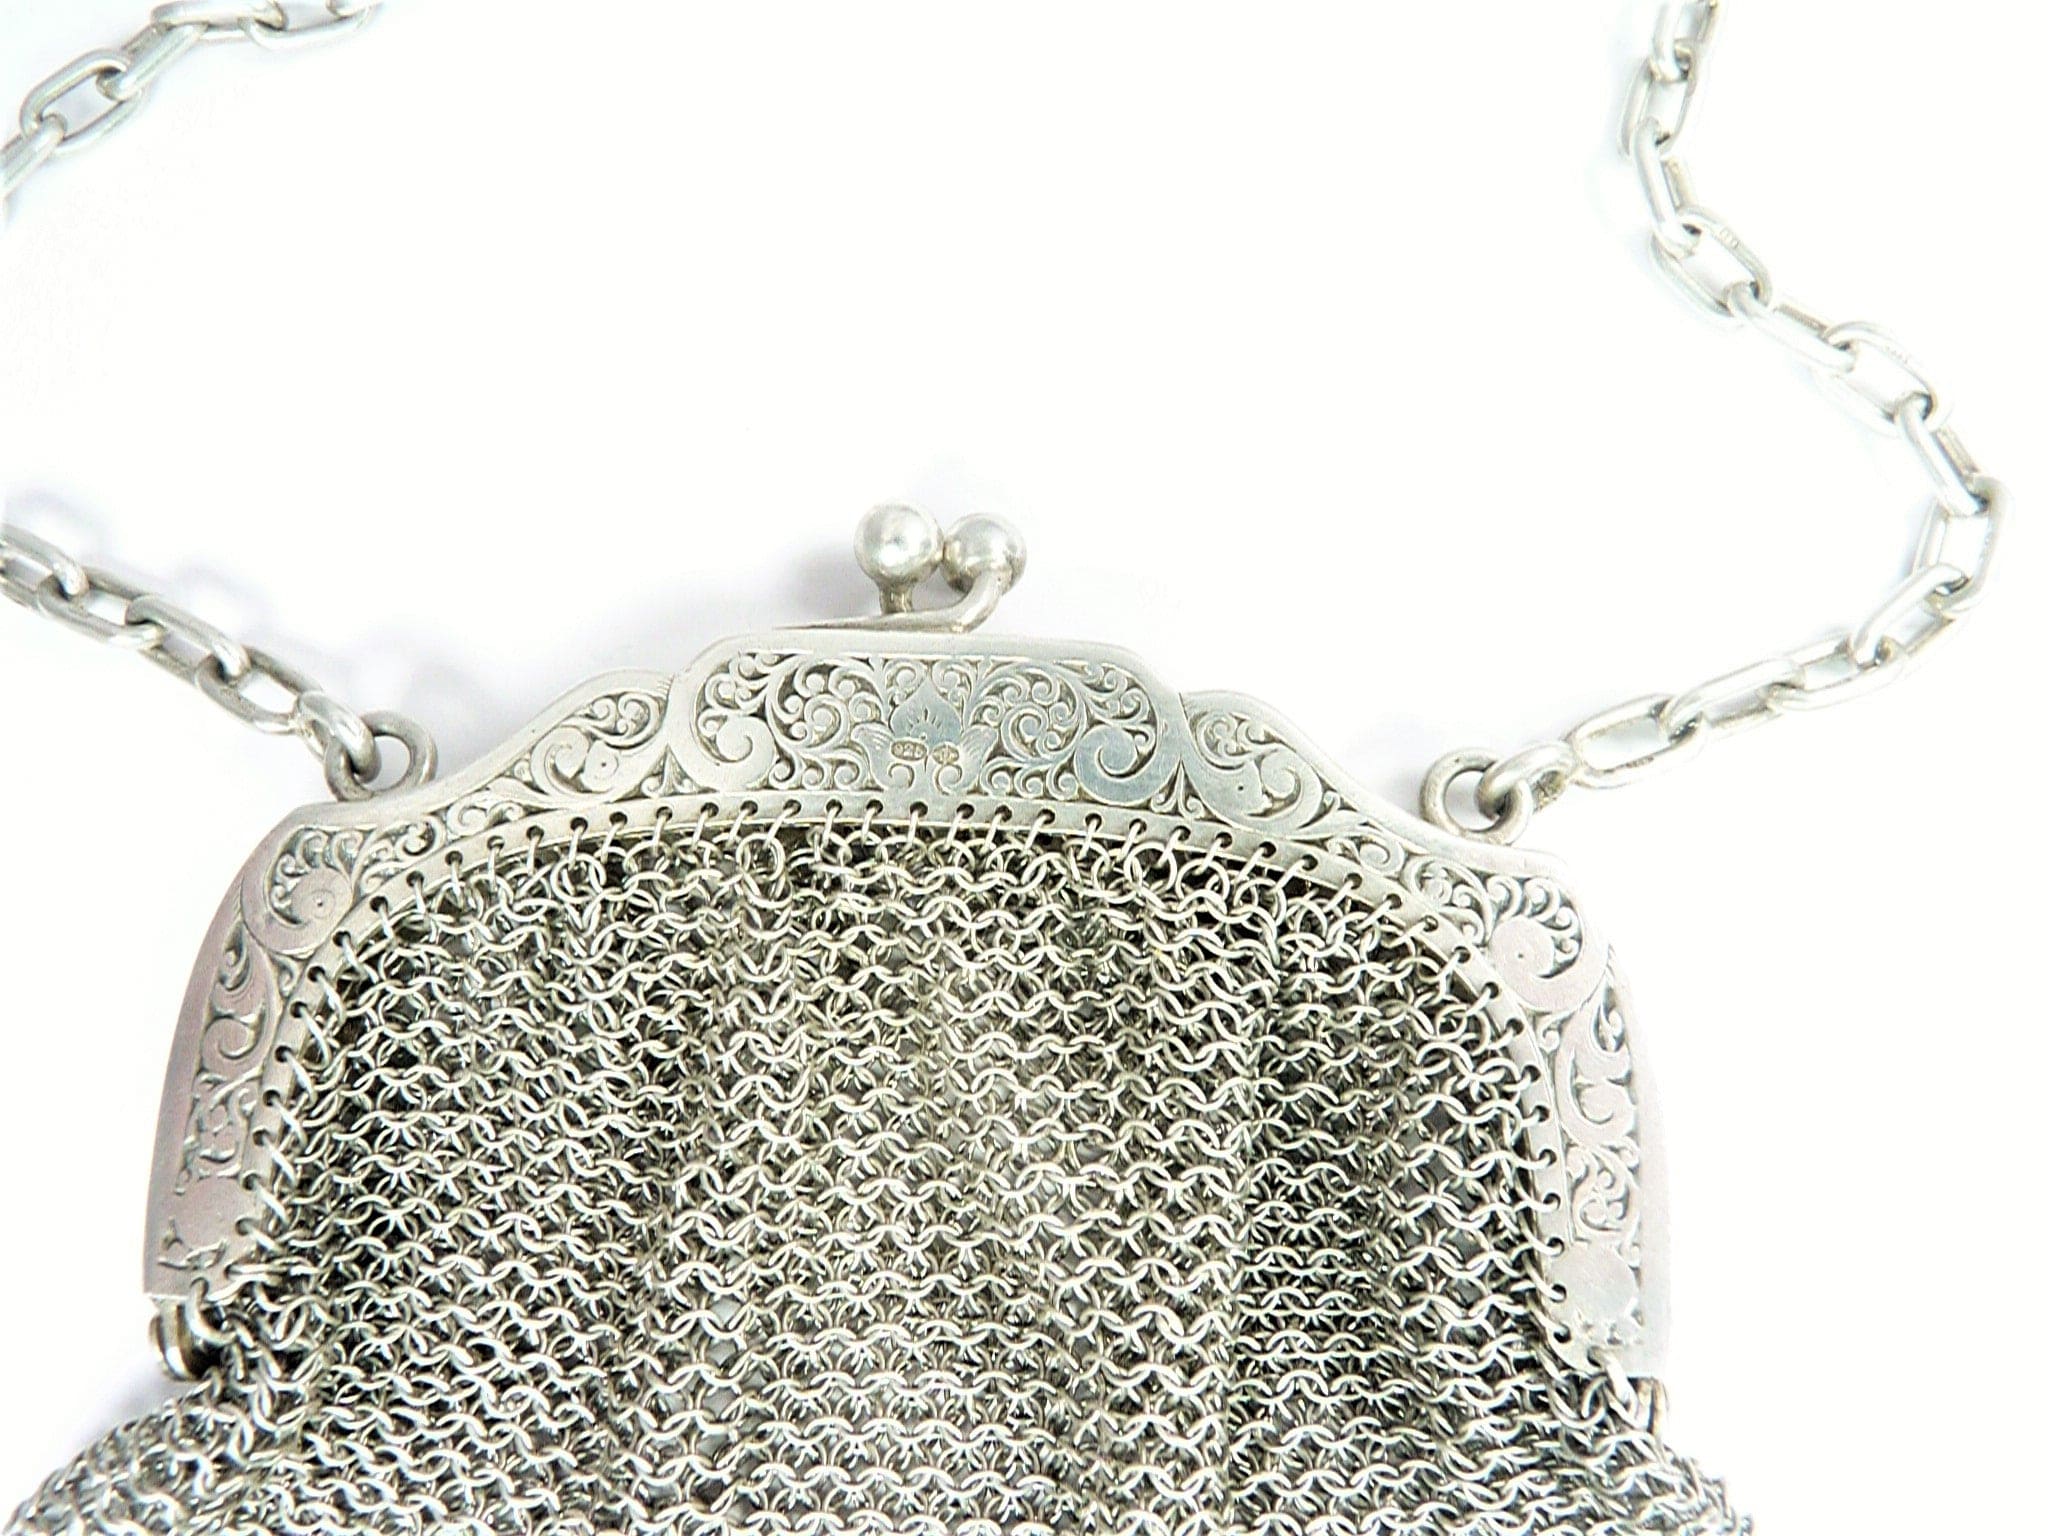 Antique Silver Chatelaine 12 Tassel Flat Ring Chain Mail Mesh Purse 1890s |  eBay